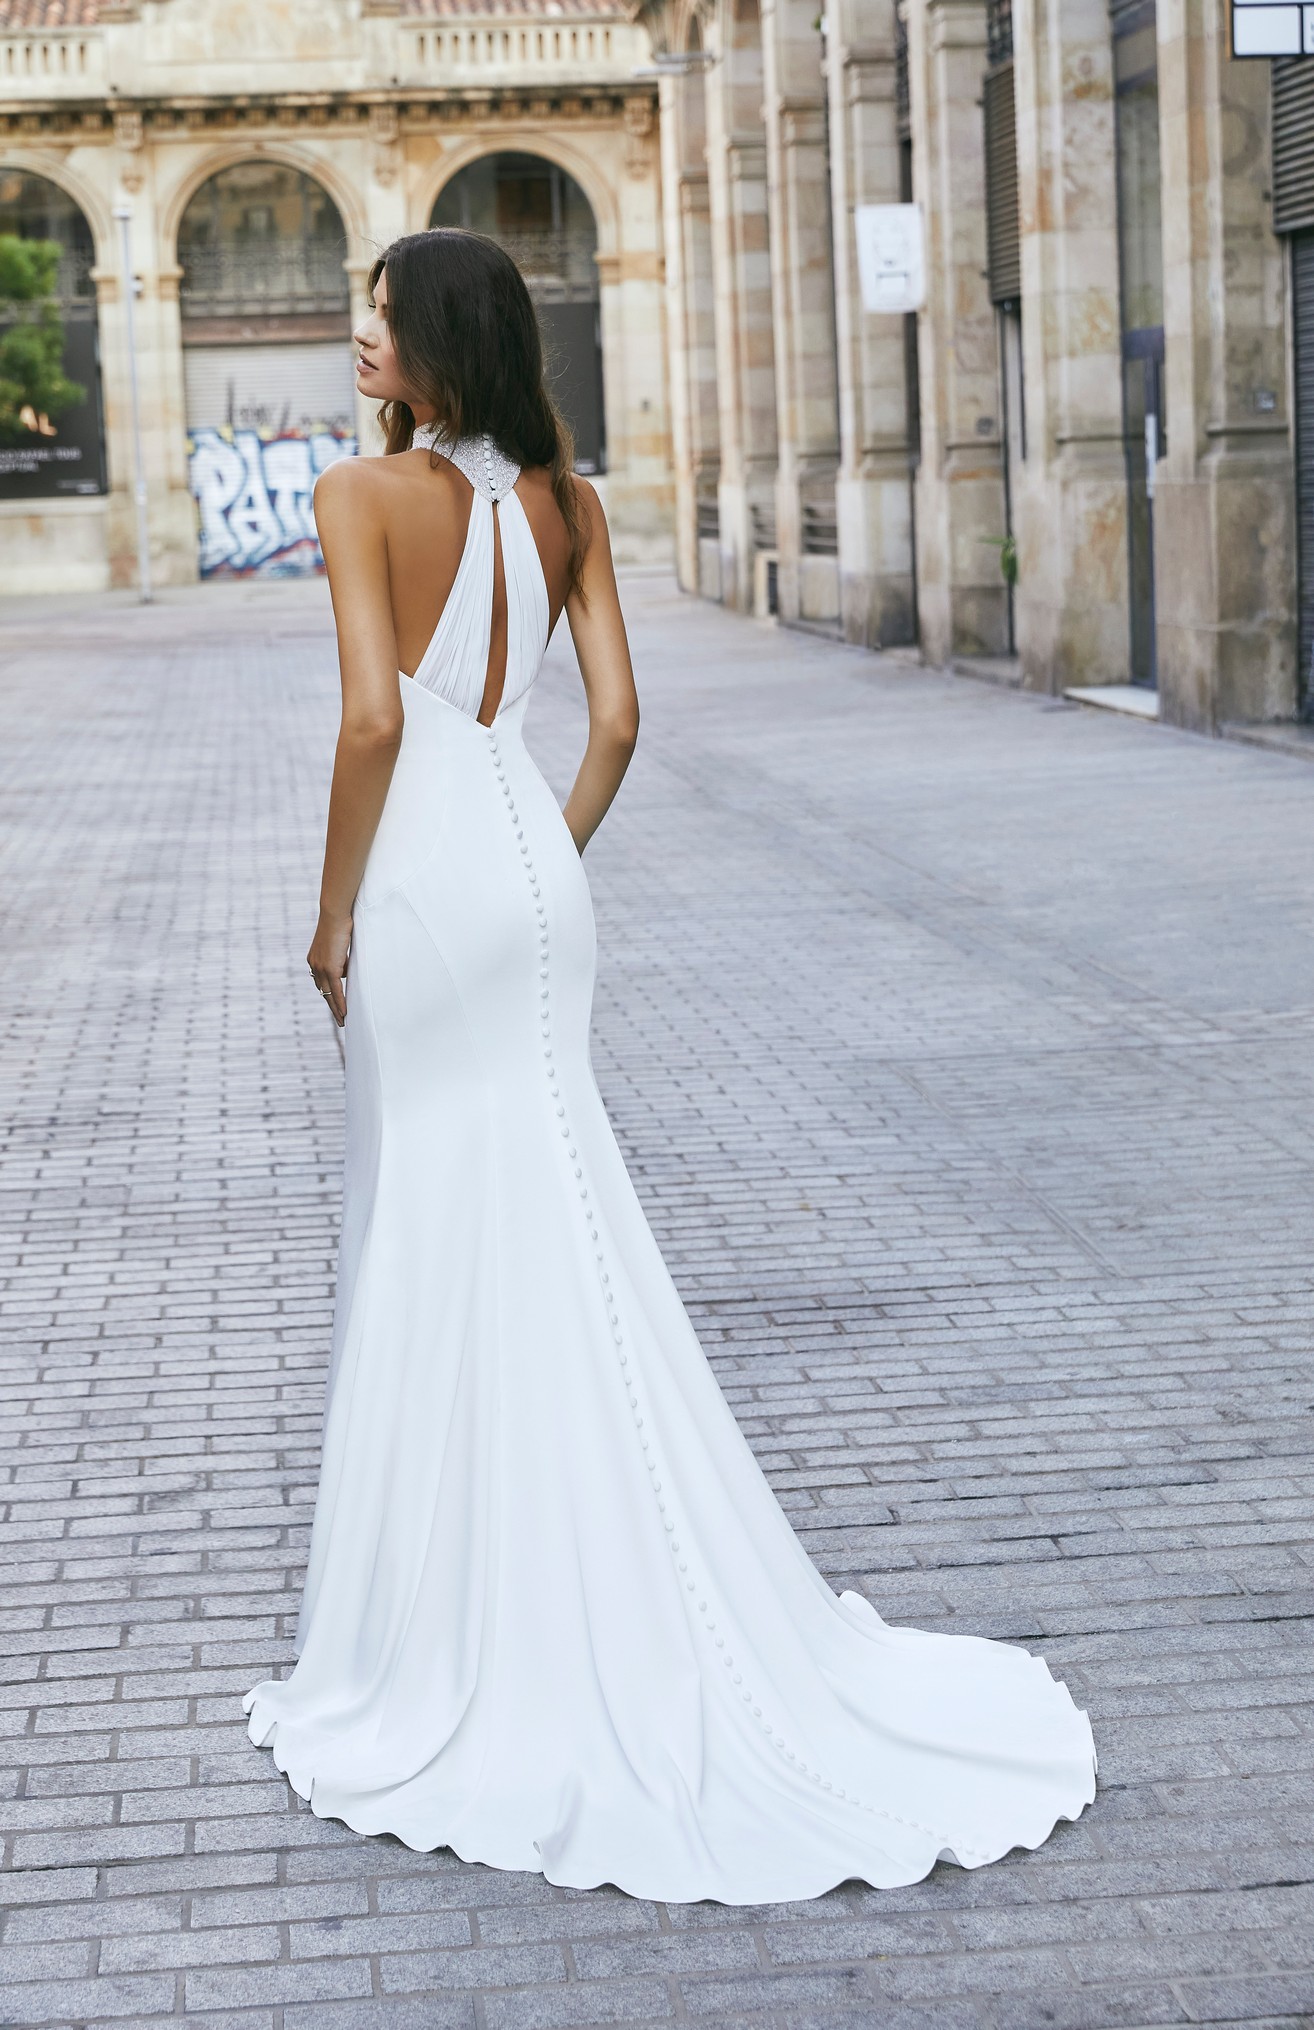 Lady stands in Barcelona plaza wearing classic crepe fit and flare wedding dress with unique back detail